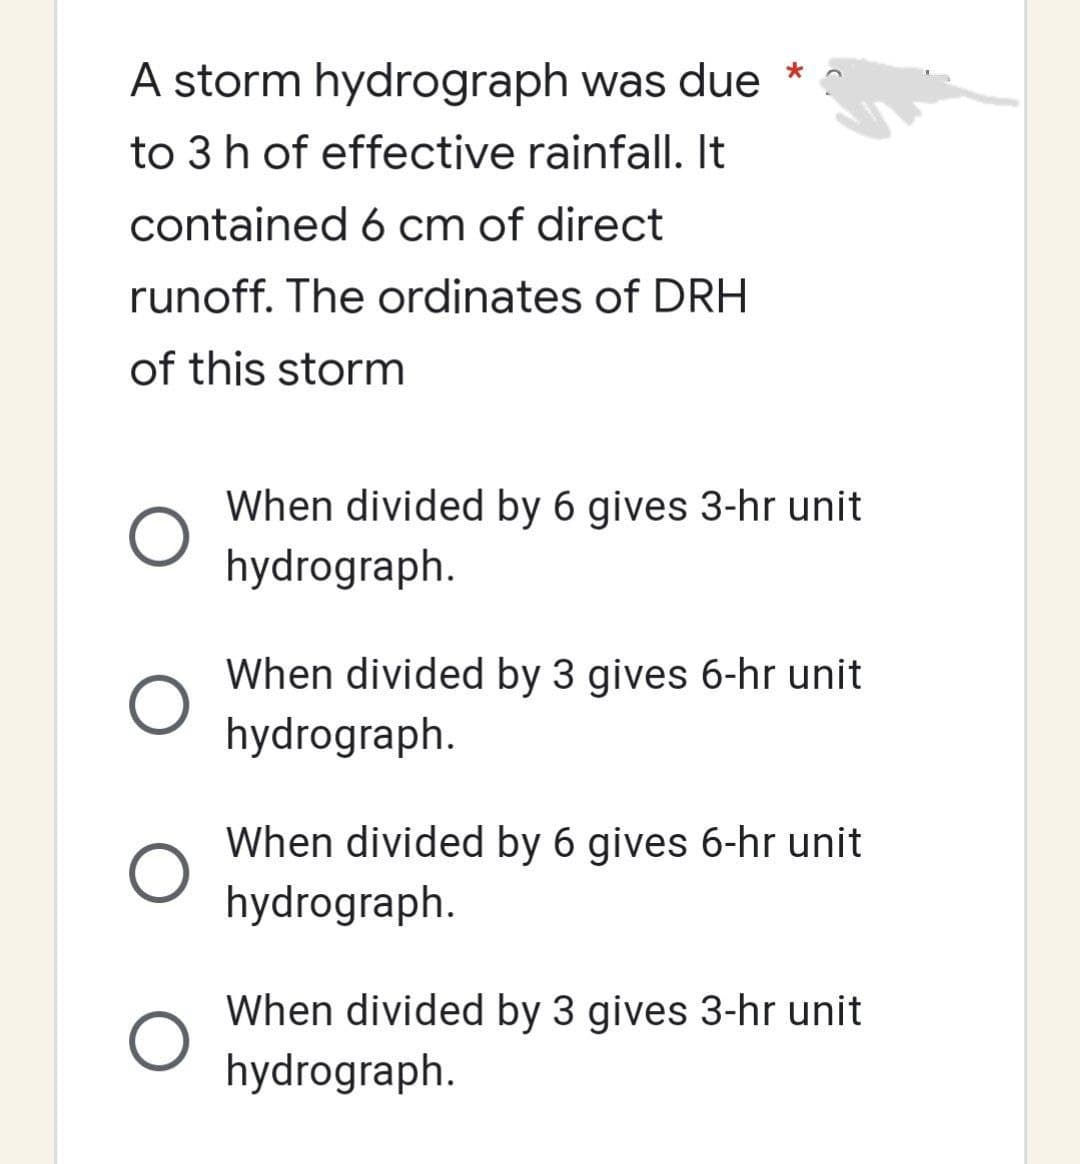 A storm hydrograph was due *
to 3 h of effective rainfall. It
contained 6 cm of direct
runoff. The ordinates of DRH
of this storm
O
When divided by 6 gives 3-hr unit
hydrograph.
When divided by 3 gives 6-hr unit
hydrograph.
When divided by 6 gives 6-hr unit
hydrograph.
When divided by 3 gives 3-hr unit
hydrograph.